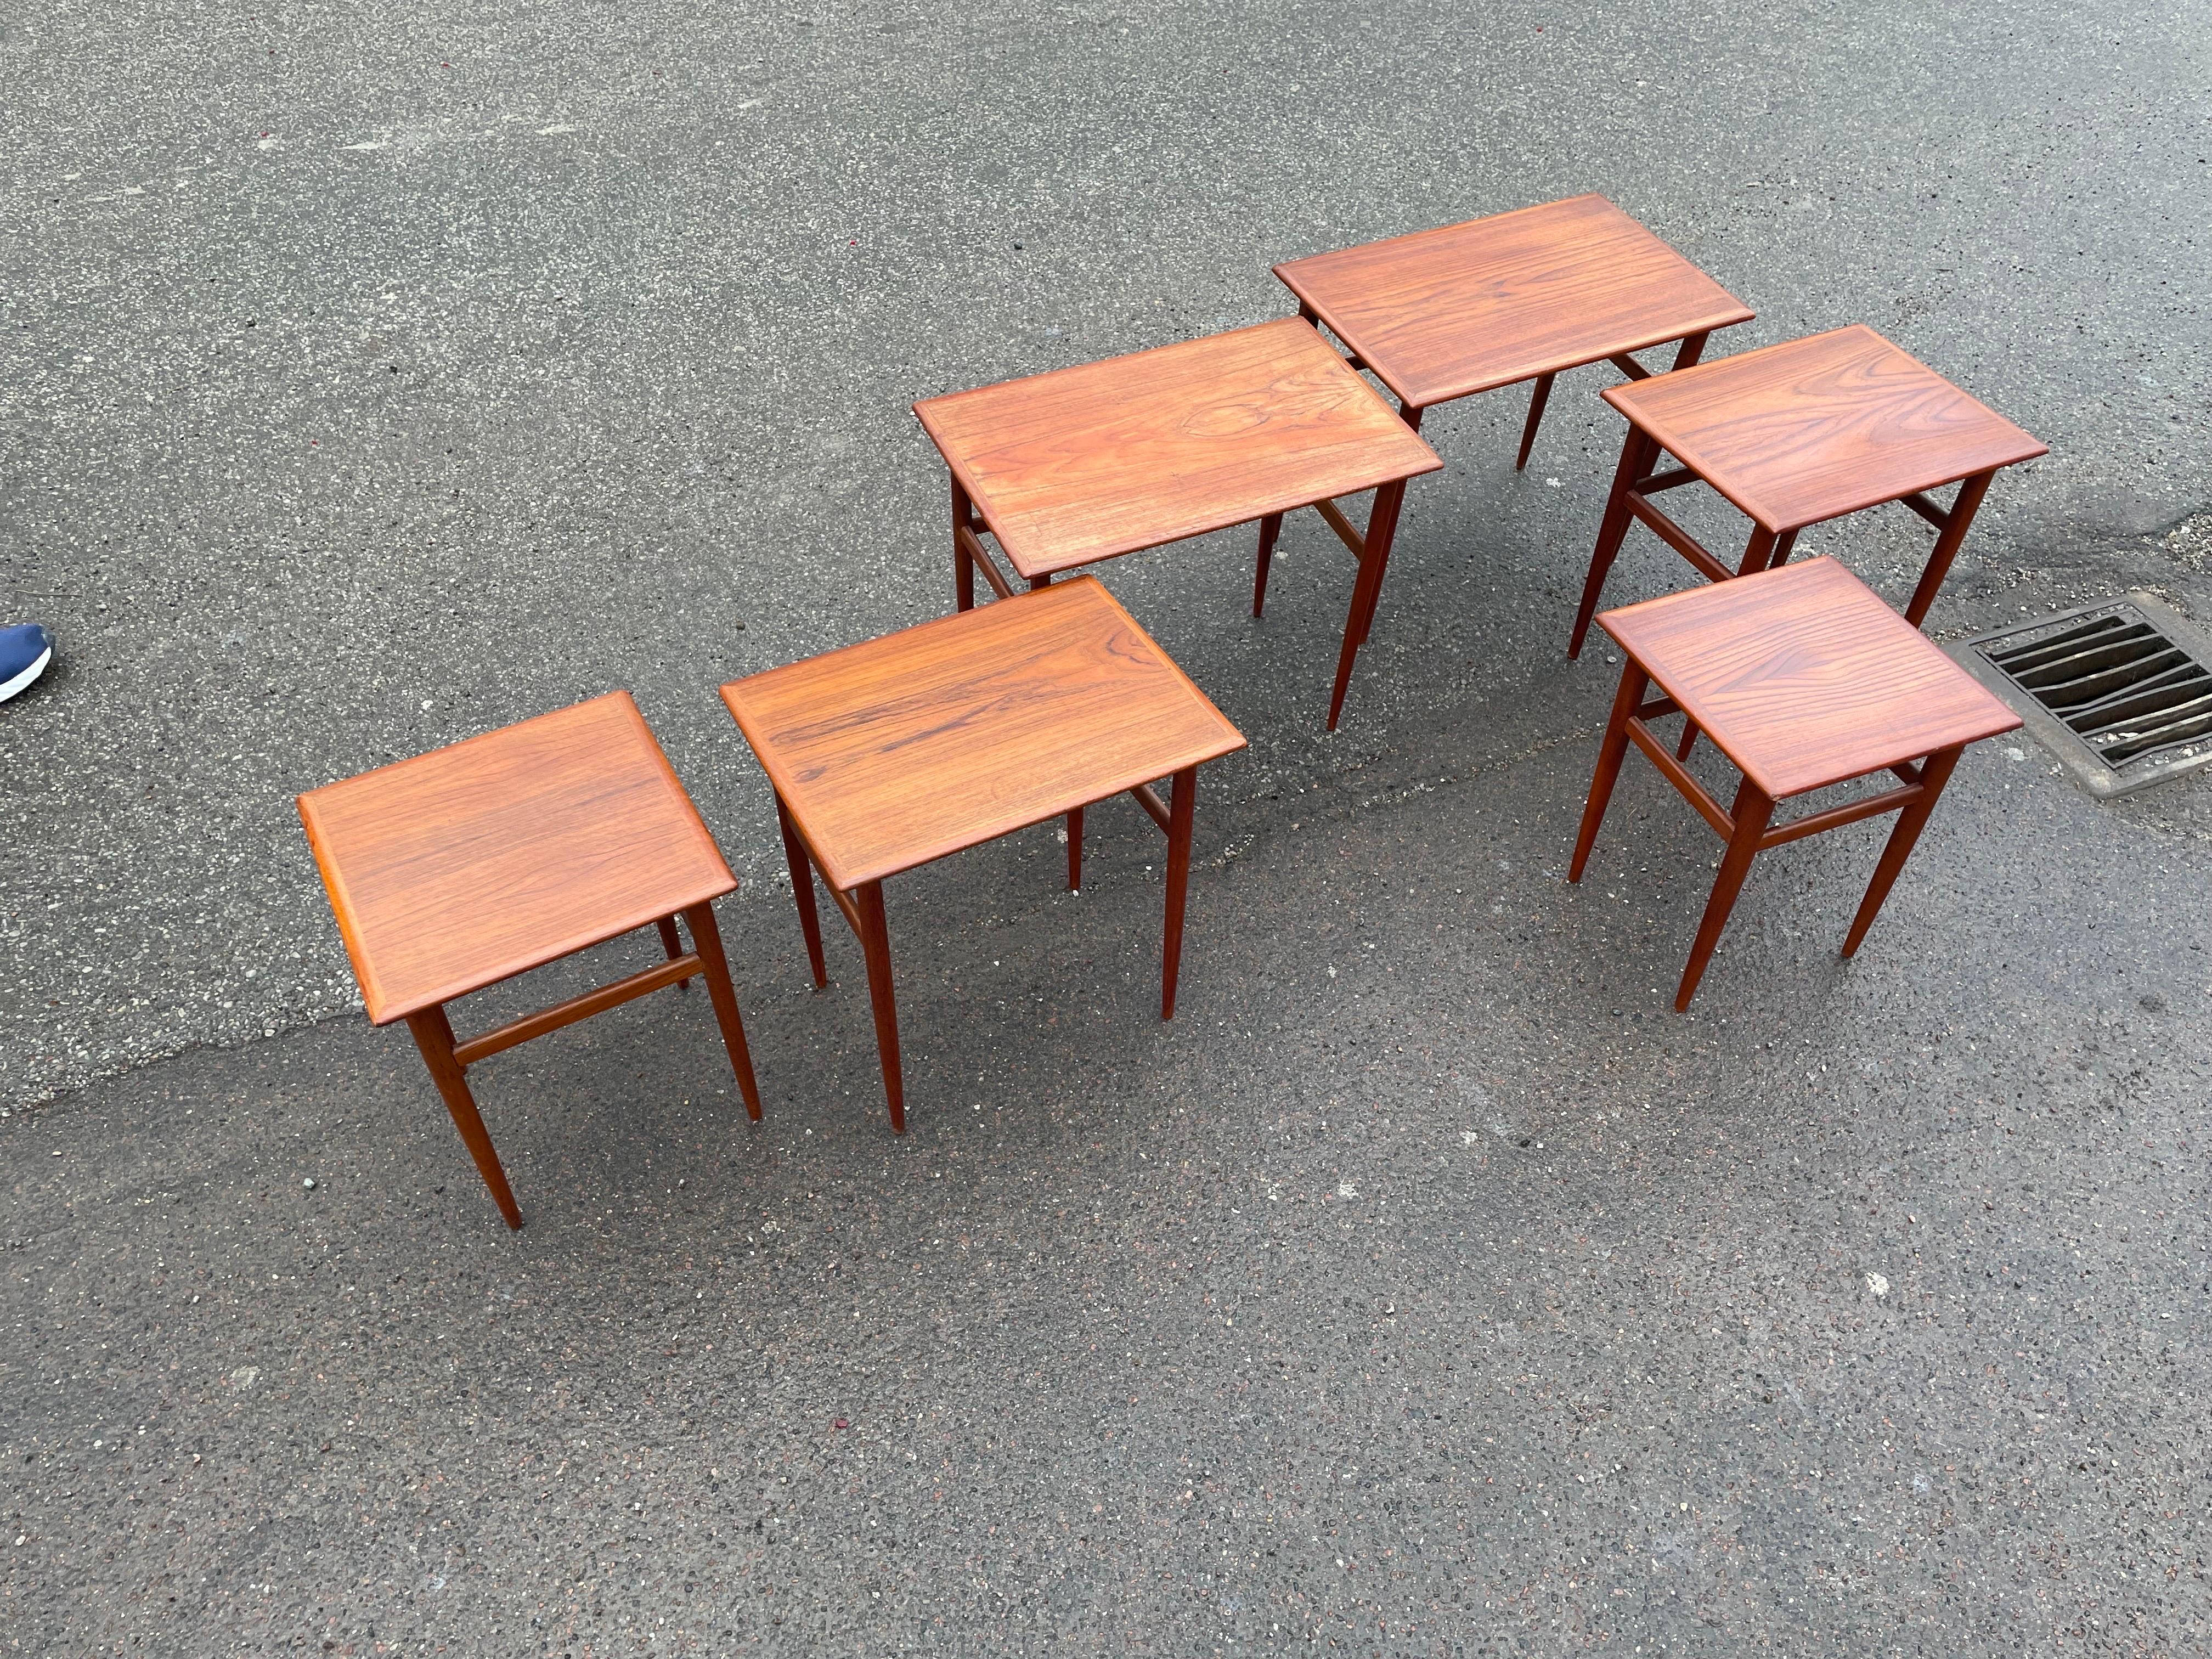 Mid-20th Century Pair of Identical Danish Teak Nesting Tables from the, 1960s For Sale